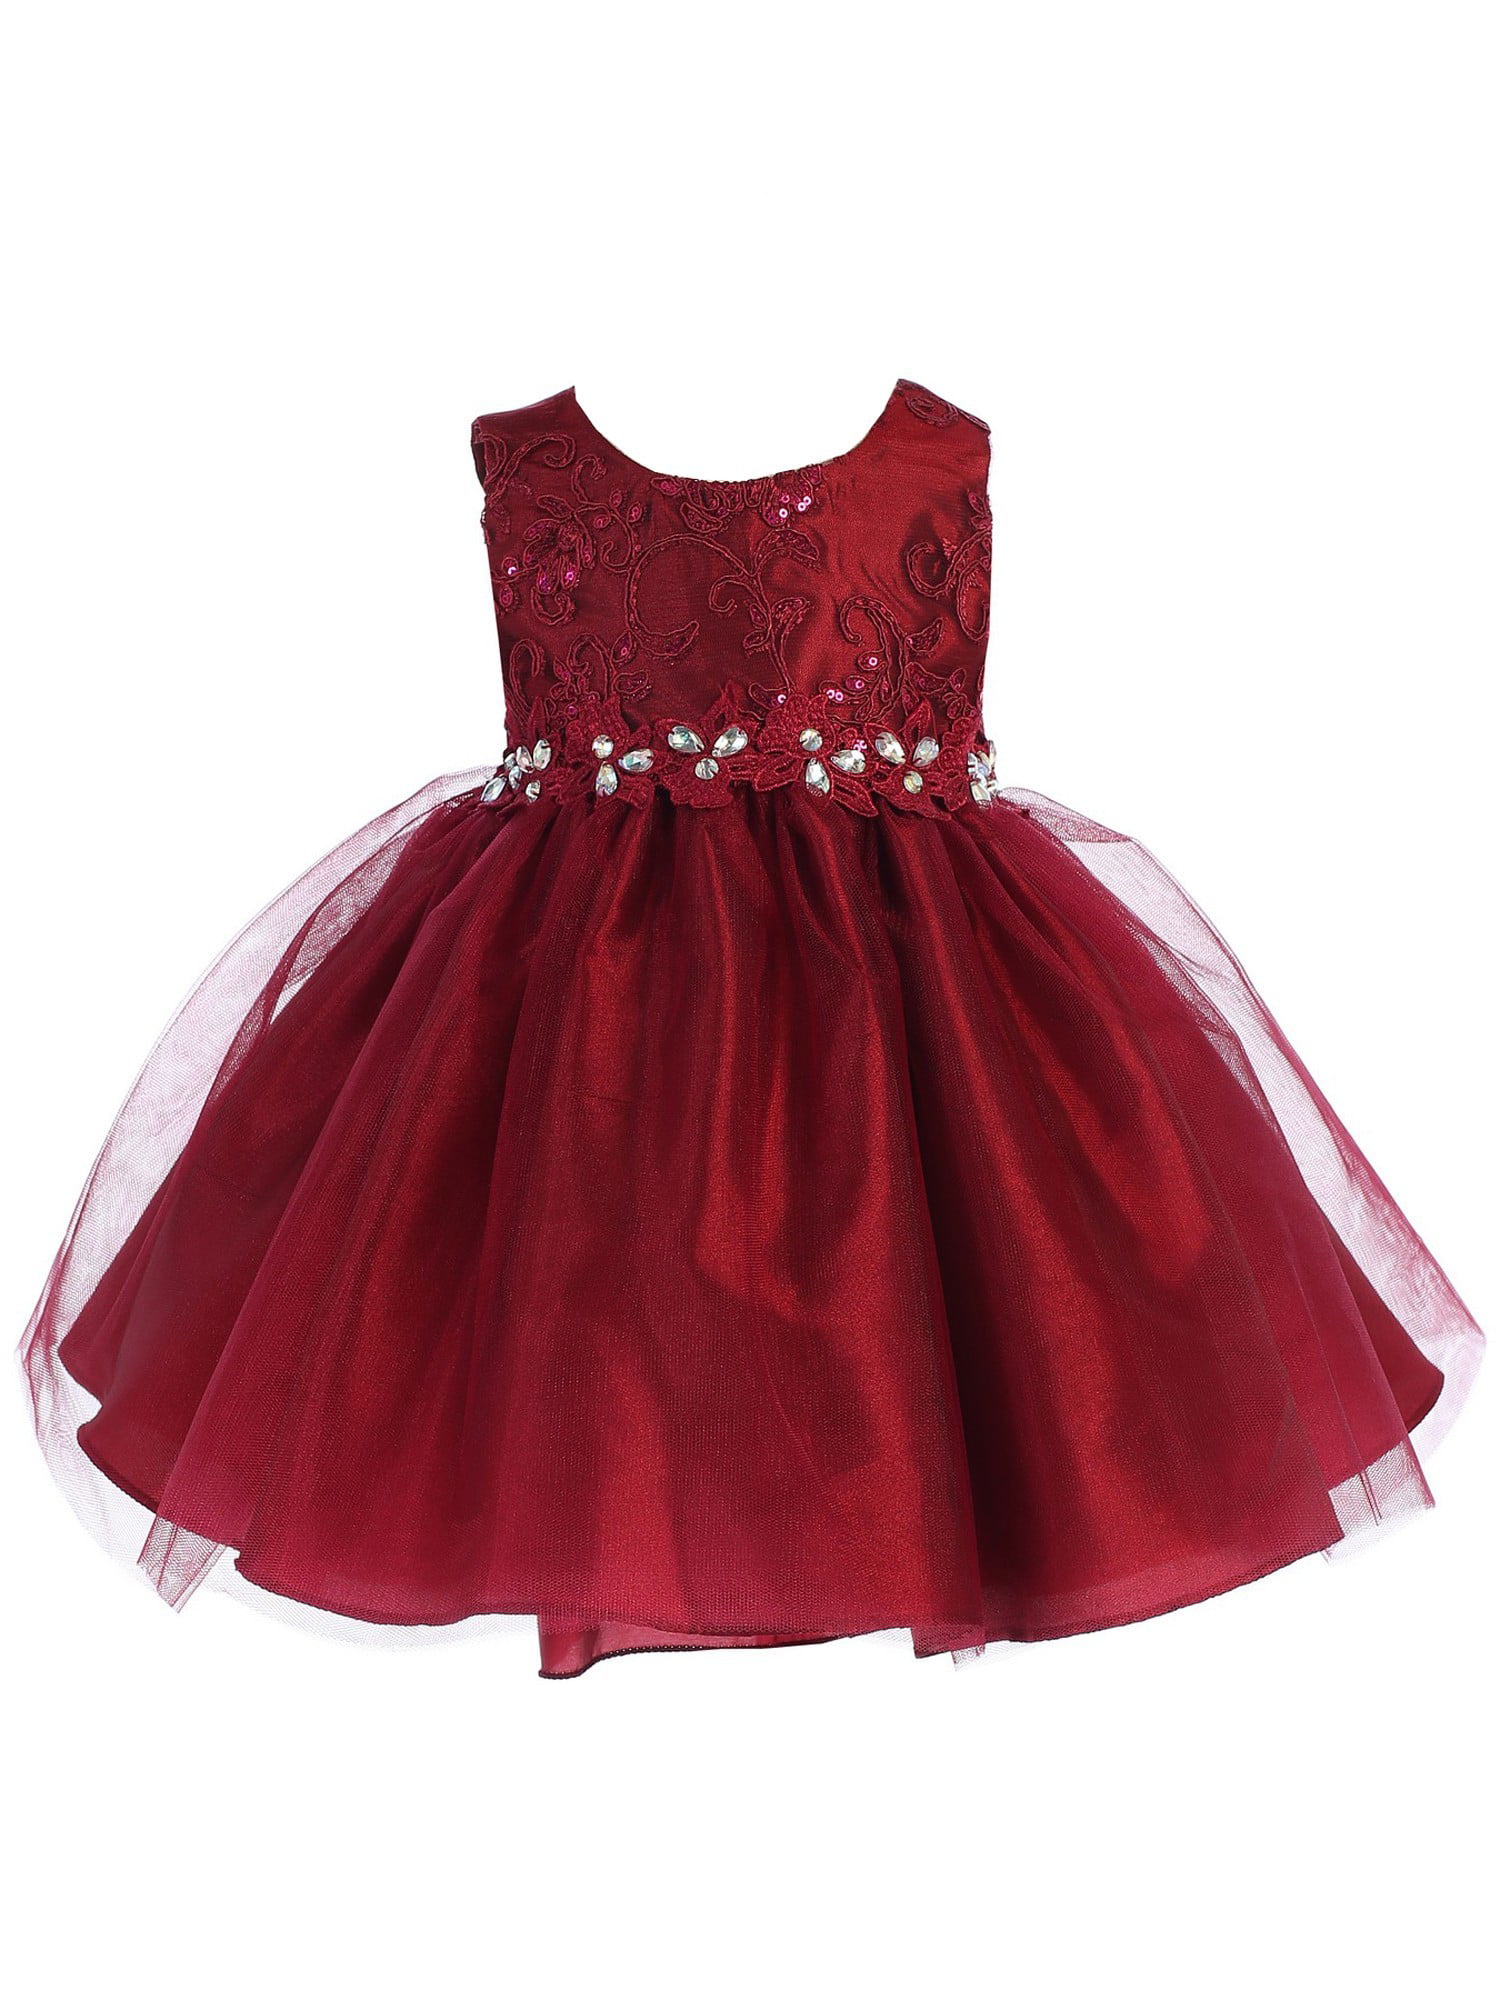 Good Girl - Baby Girls Burgundy Lace Sequin Embroidered ...